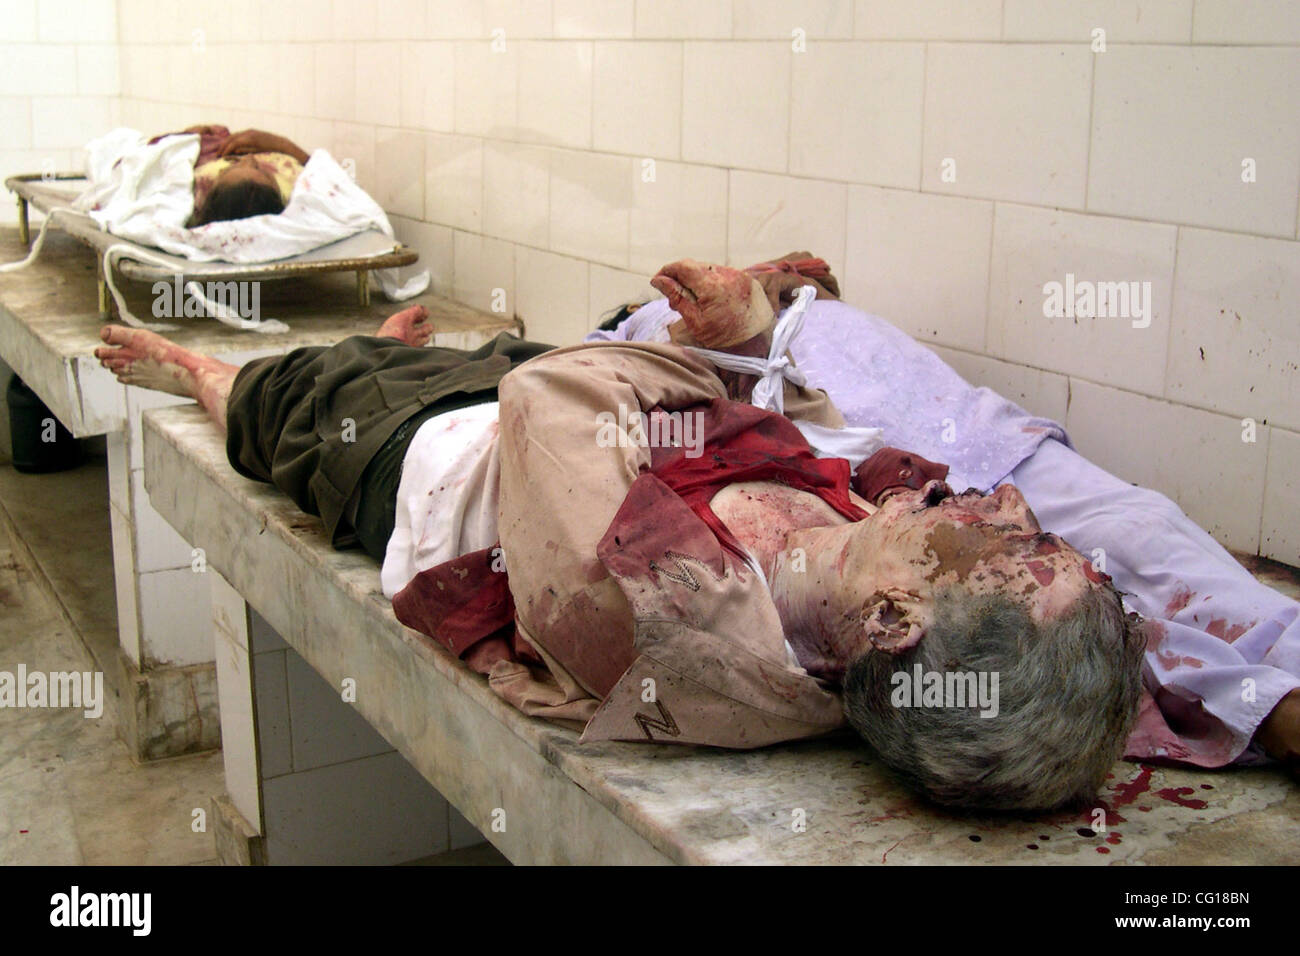 Dead Bodies of Tourists Lie In Police control room after a grenade explosion in Srinagar, India, Sunday, July 29, 2007. An explosion inside a bus carrying tourists killed at least 4 and wounded 21 others outside popular Shalimar Garden, police said. PHOTO/ALTAF ZARGAR. Stock Photo